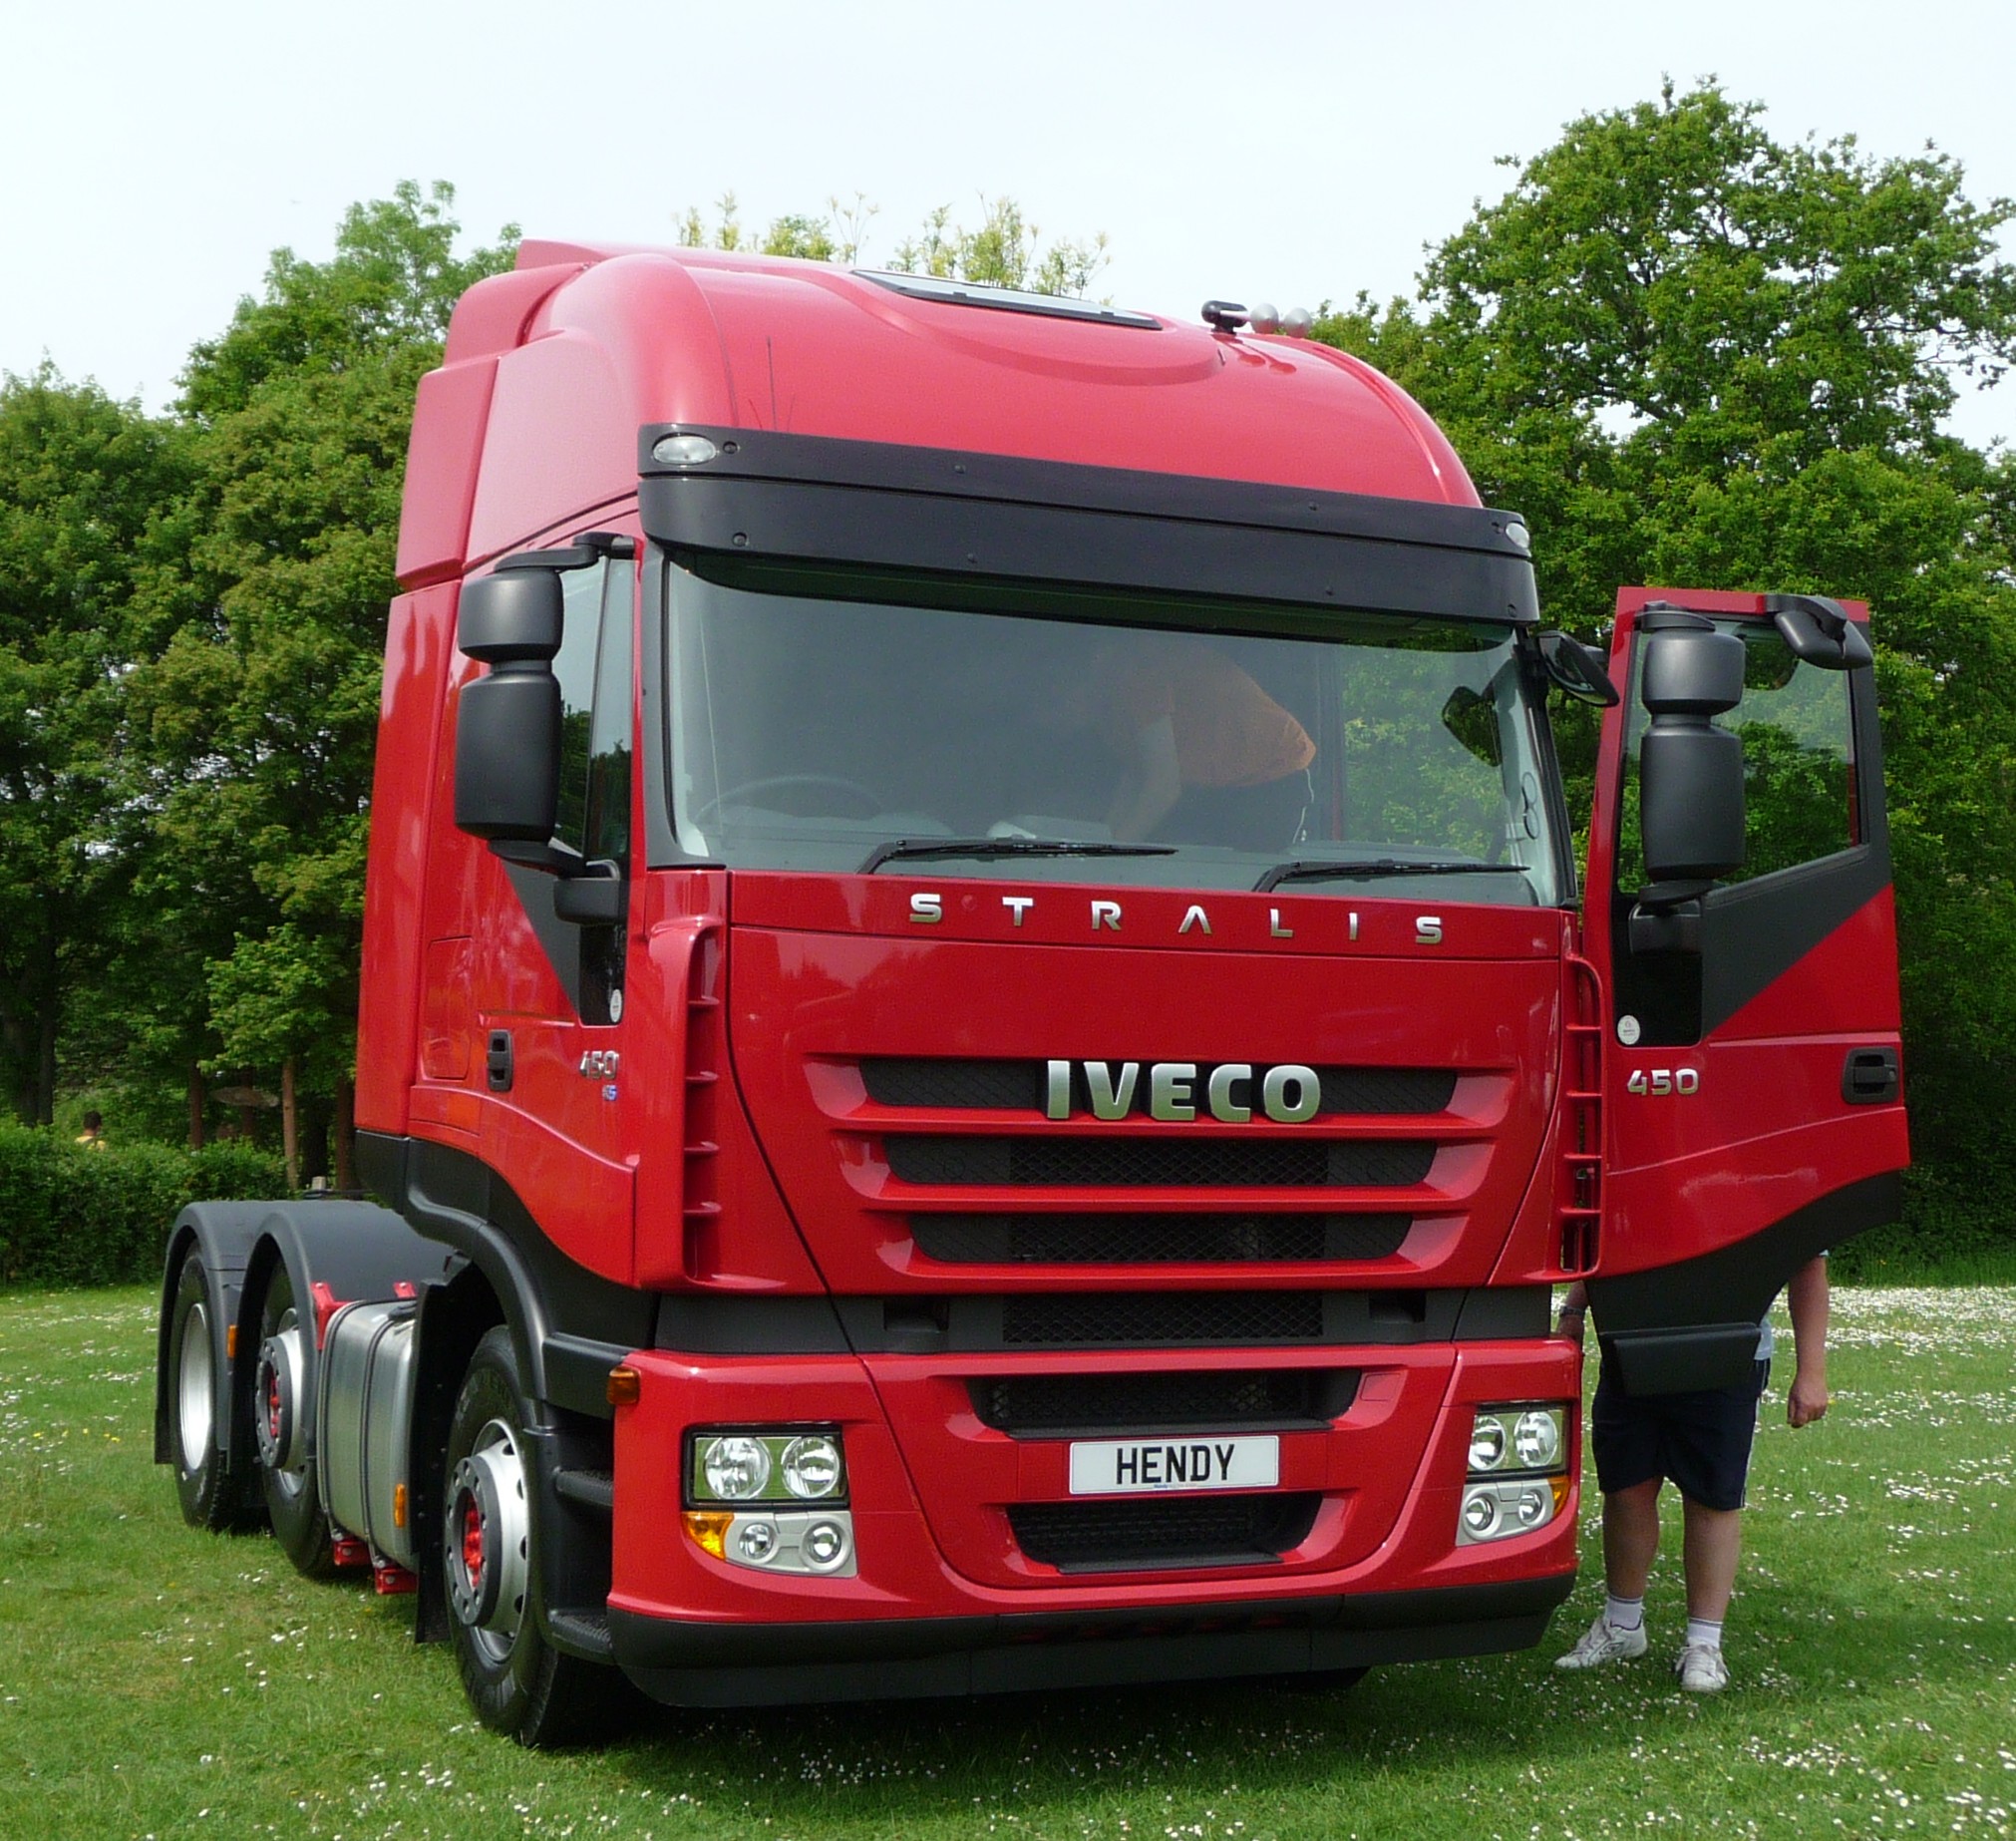 Iveco_Stralis_cab_at_Southern_Vectis_Bustival